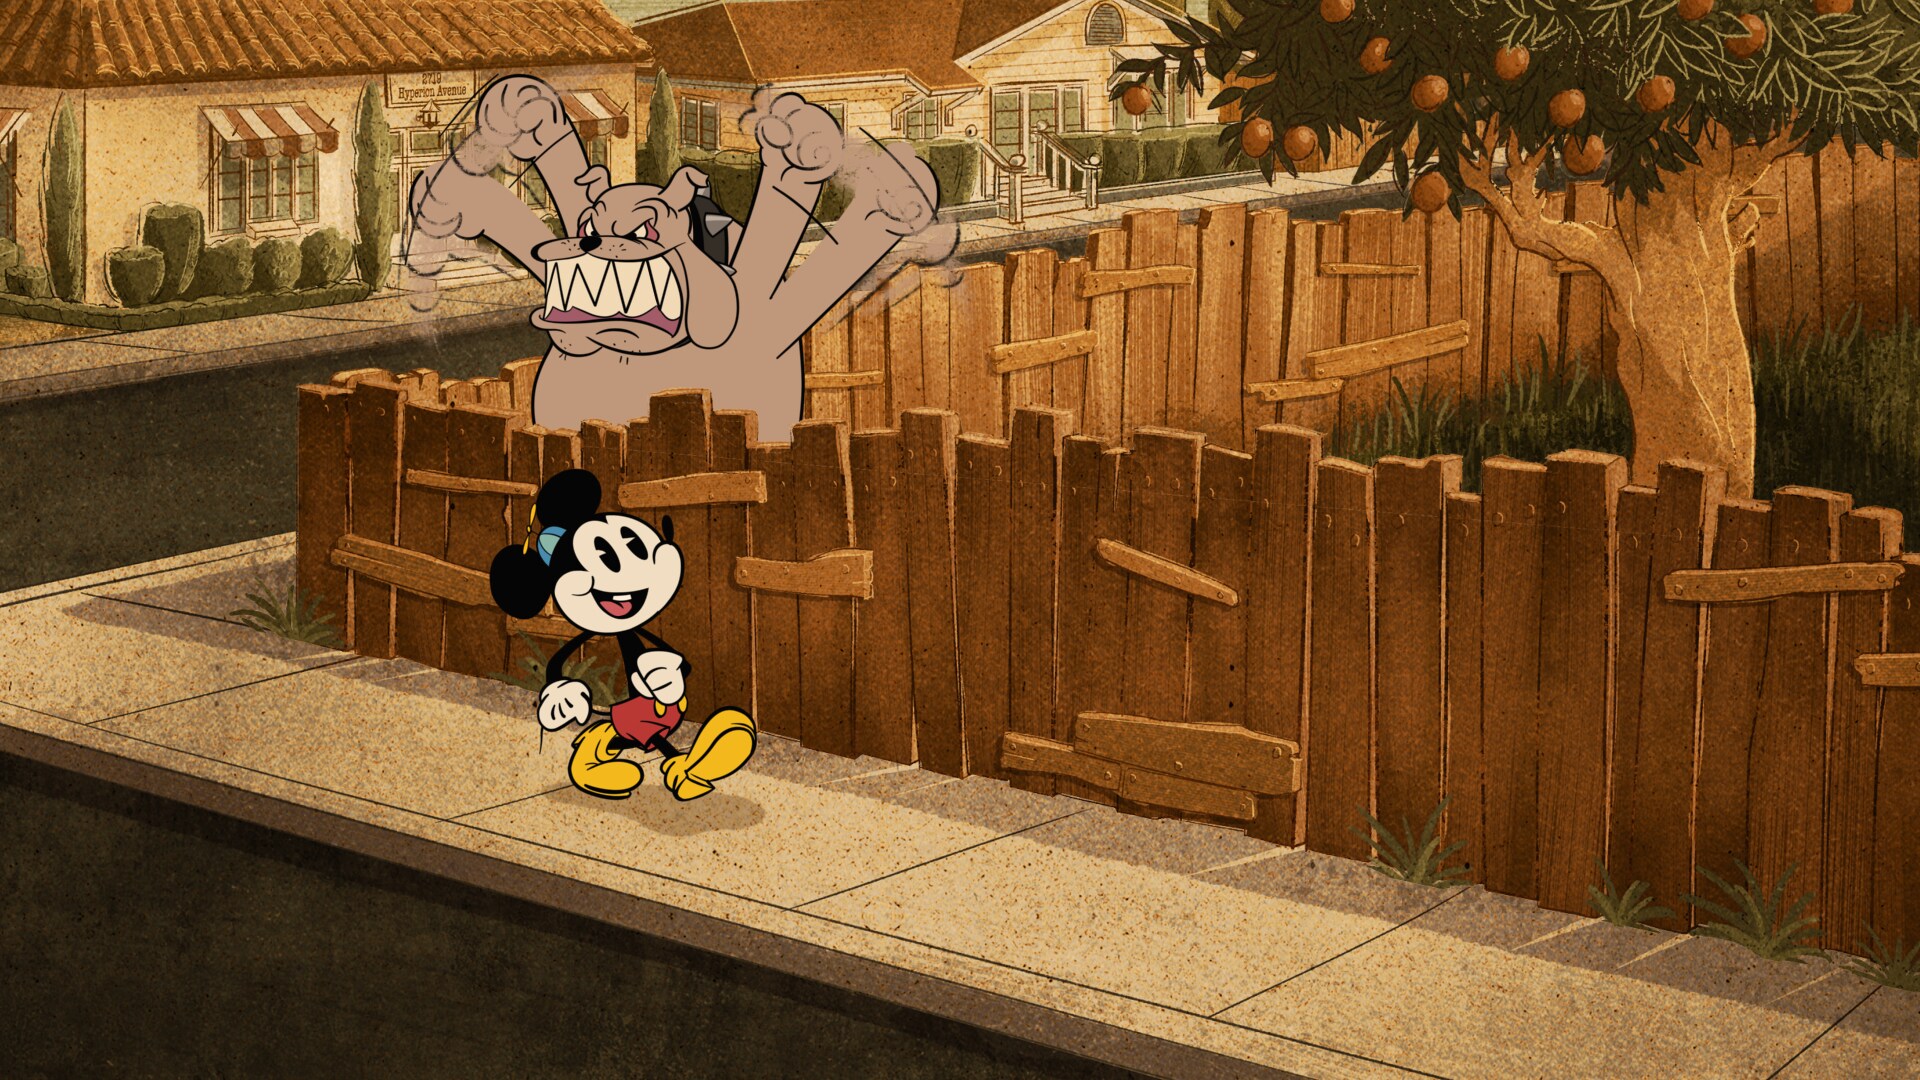 THE WONDERFUL WORLD OF MICKEY MOUSE - "School of Fish" - Mickey Mouse can't seem to let go when it comes time for his little Gubbles to attend the first day of school. (Disney+) MICKEY MOUSE